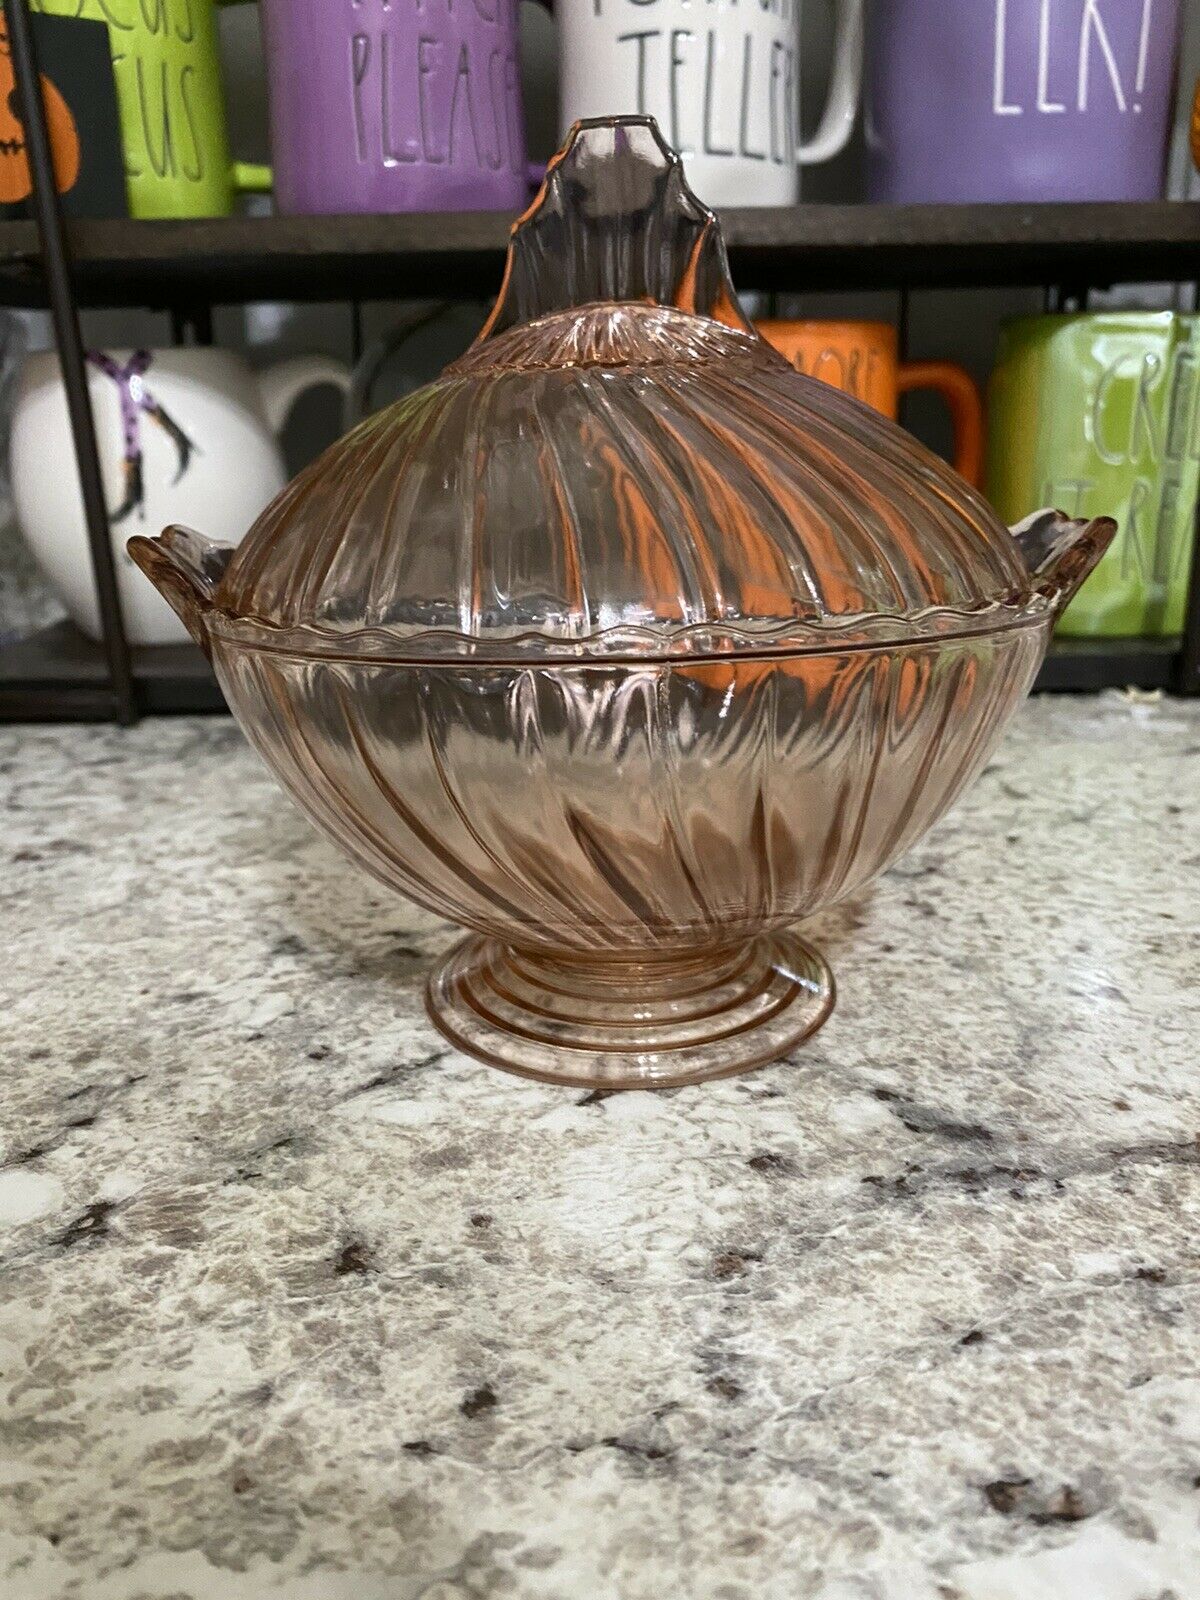 Rare Jeanette Glass Pink Petal Swirl Covered Footed Candy Dish Depression Glass